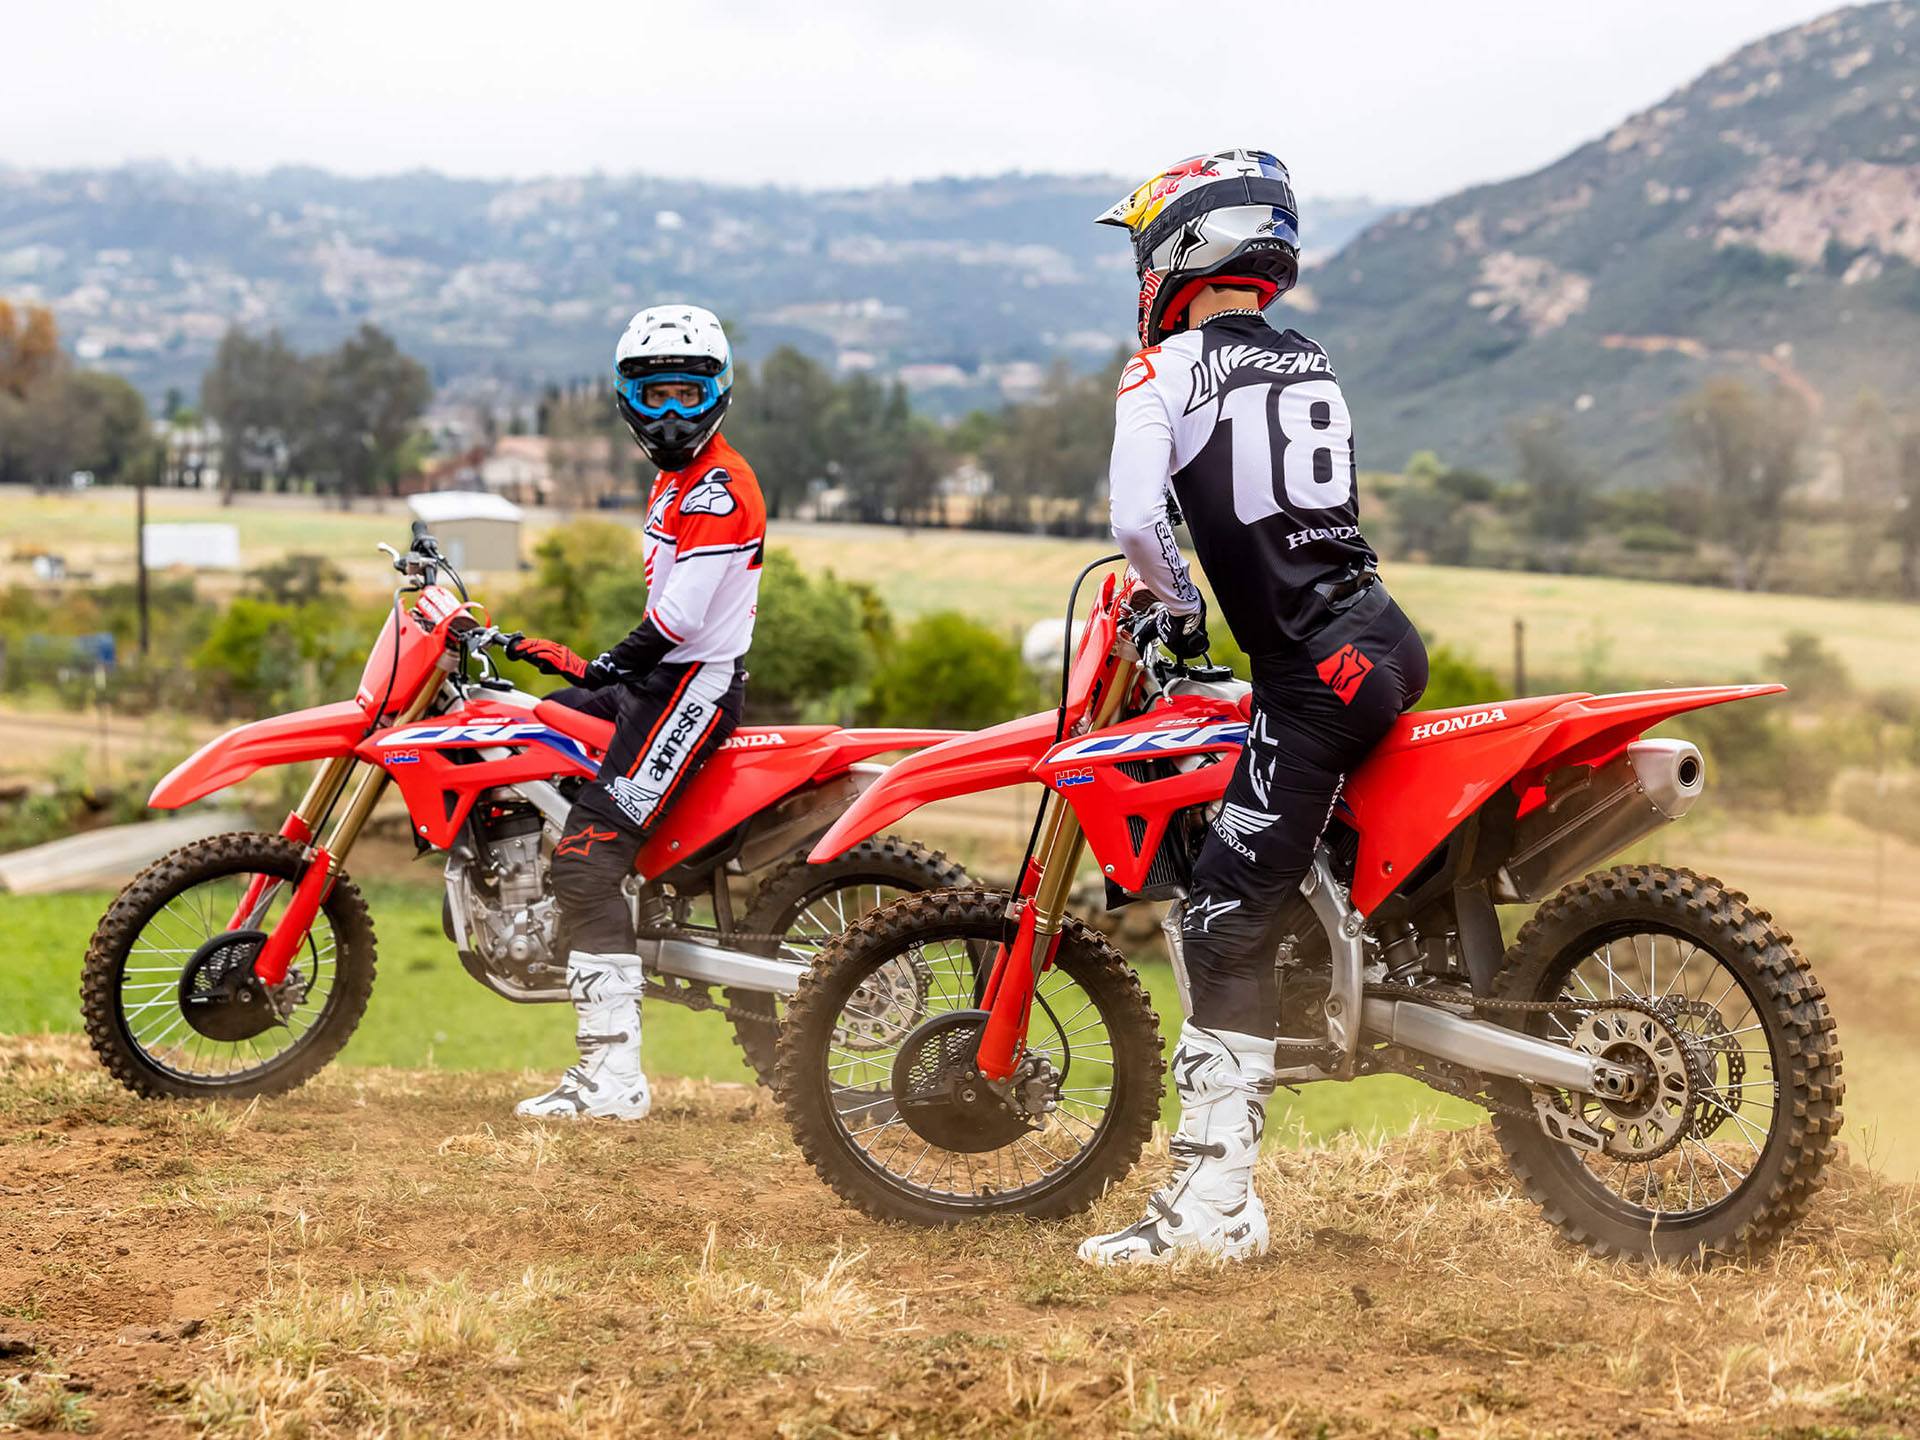 2023 Honda CRF250R in Sterling, Illinois - Photo 2